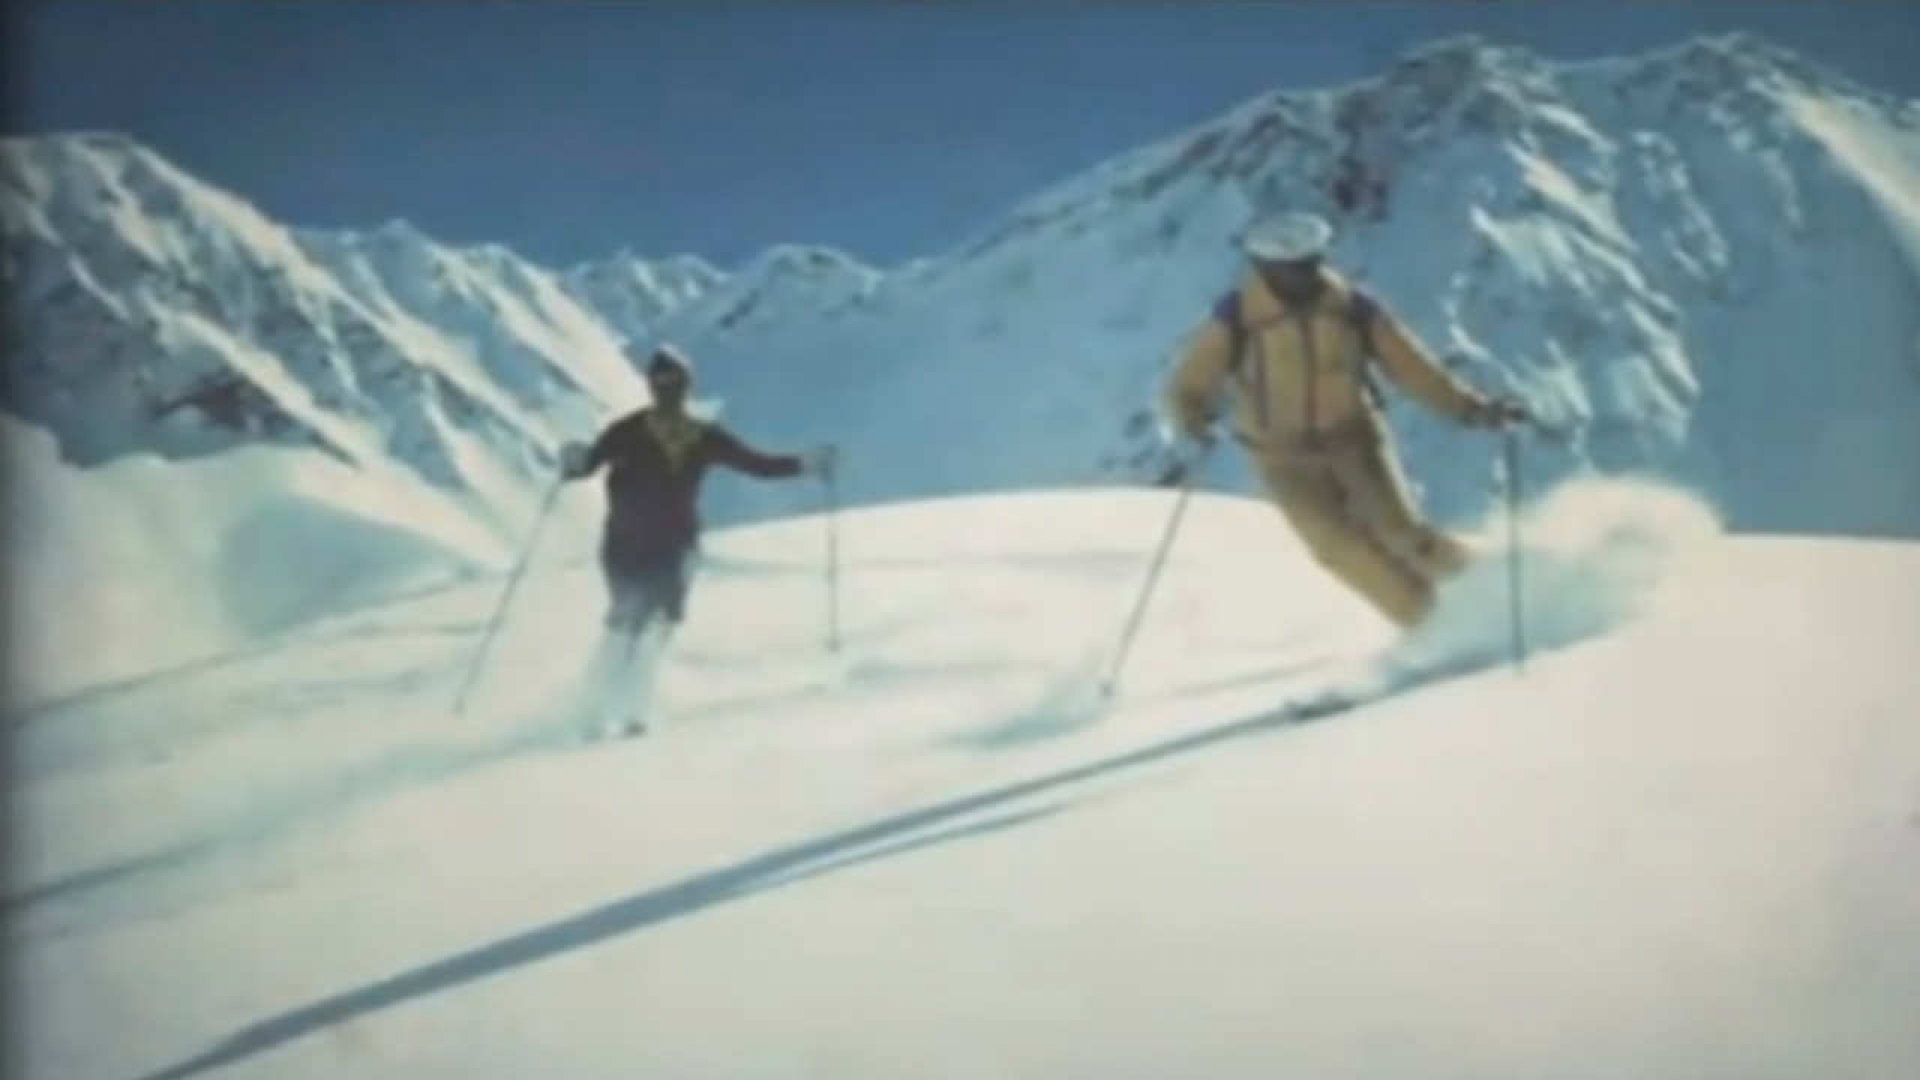 Heliskiing back in the days